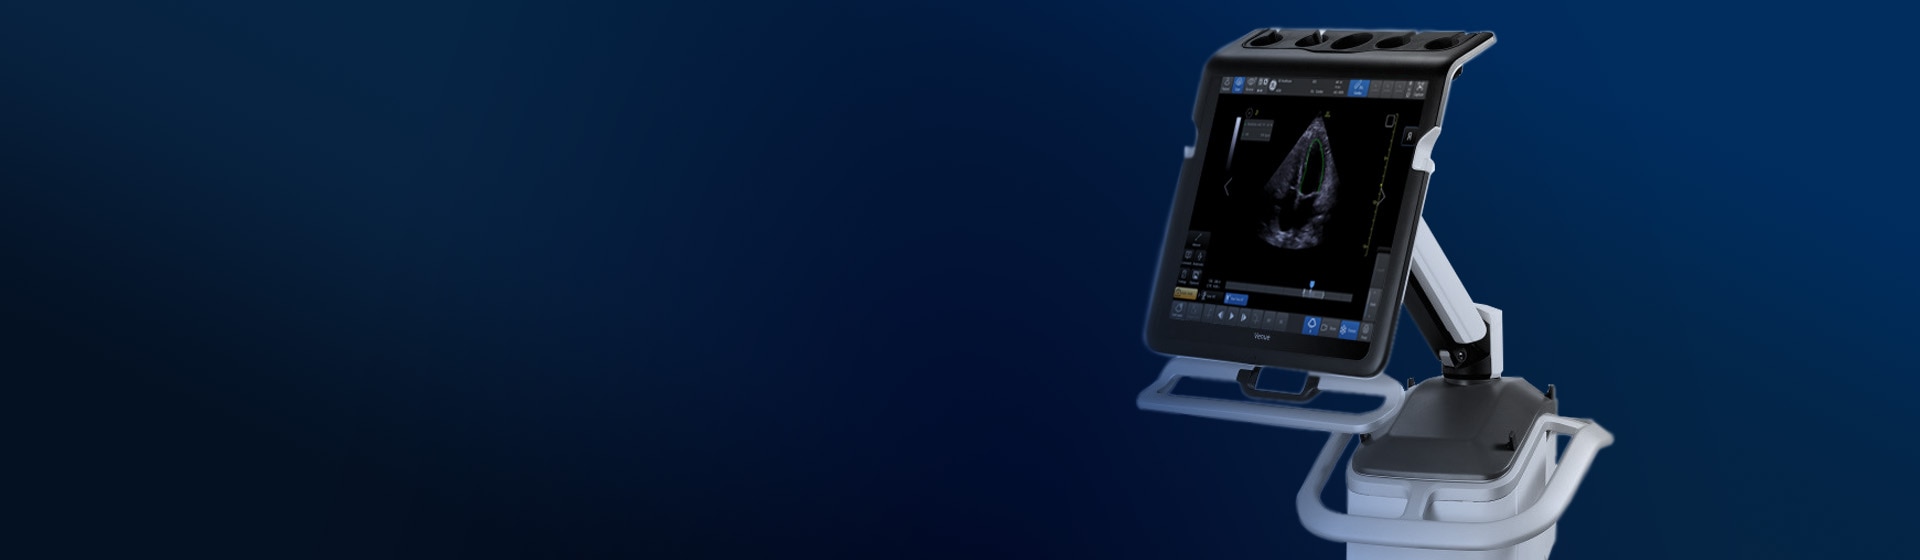 https://www.gehealthcare.com/-/jssmedia/global/products/images/ultrasound/point-of-care/pocus-category-header-3.jpg?h=560&iar=0&w=1920&rev=c9470184266446e4a098d9cb00890a4c&hash=A5F4231C2651B637188AEECD33D44BF4